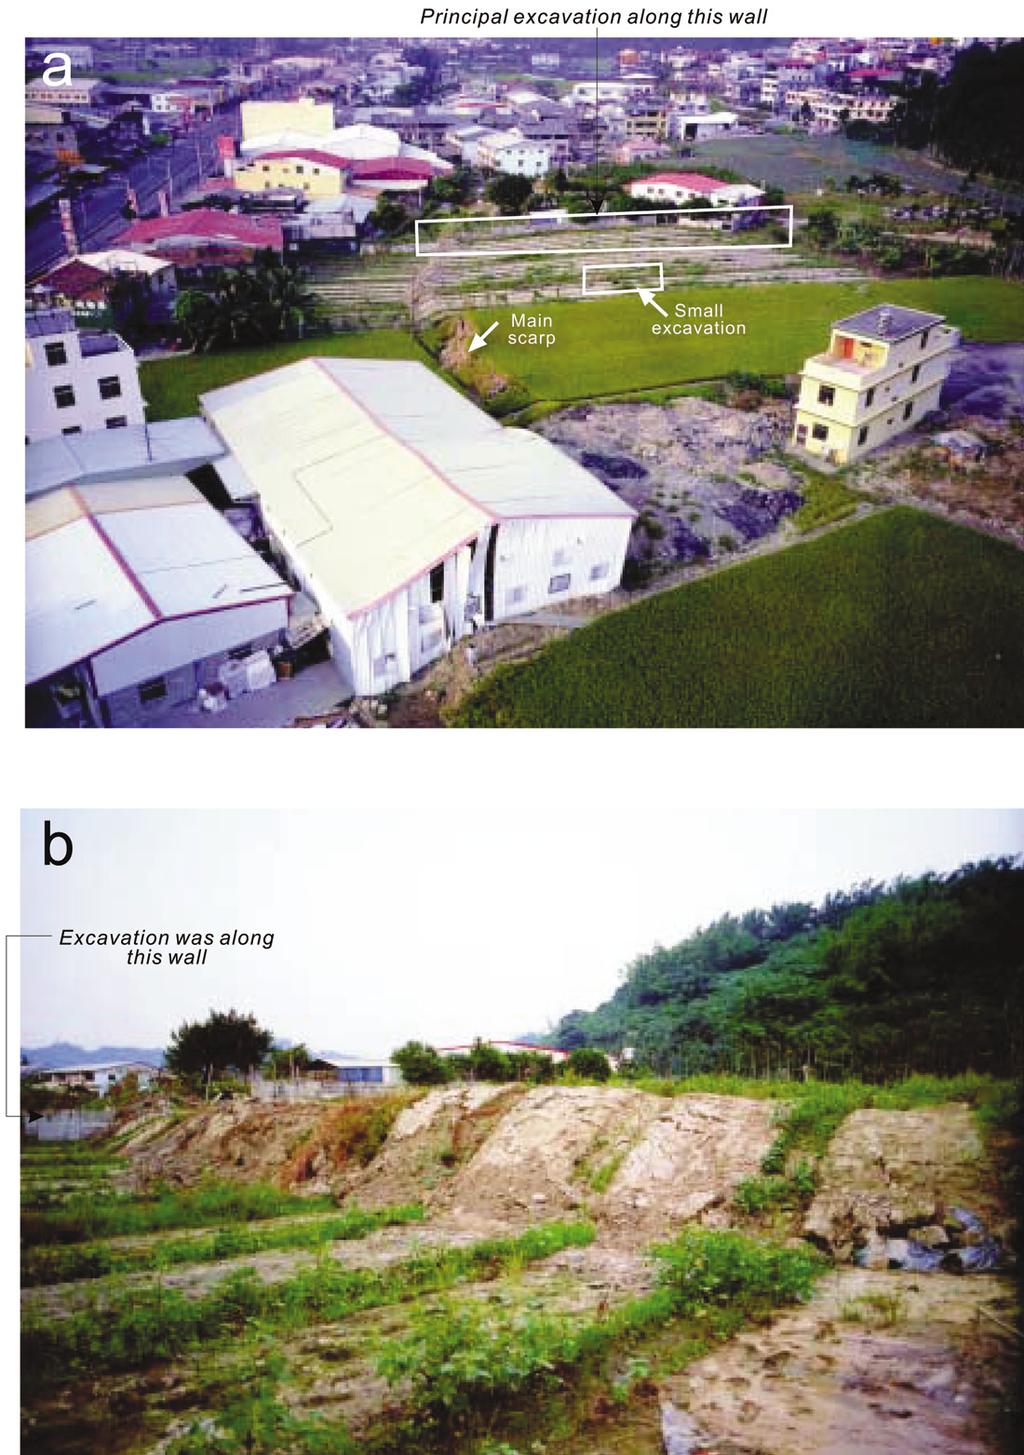 918 J.-C. Lee, Y.-G. Chen, K. Sieh, K. Mueller, W.-S. Chen, H.-T. Chu, Y.-C. Chan, C. Rubin, and R. Yeats Figure 3. Photographs of the surface ruptures at the Wufeng excavation site.